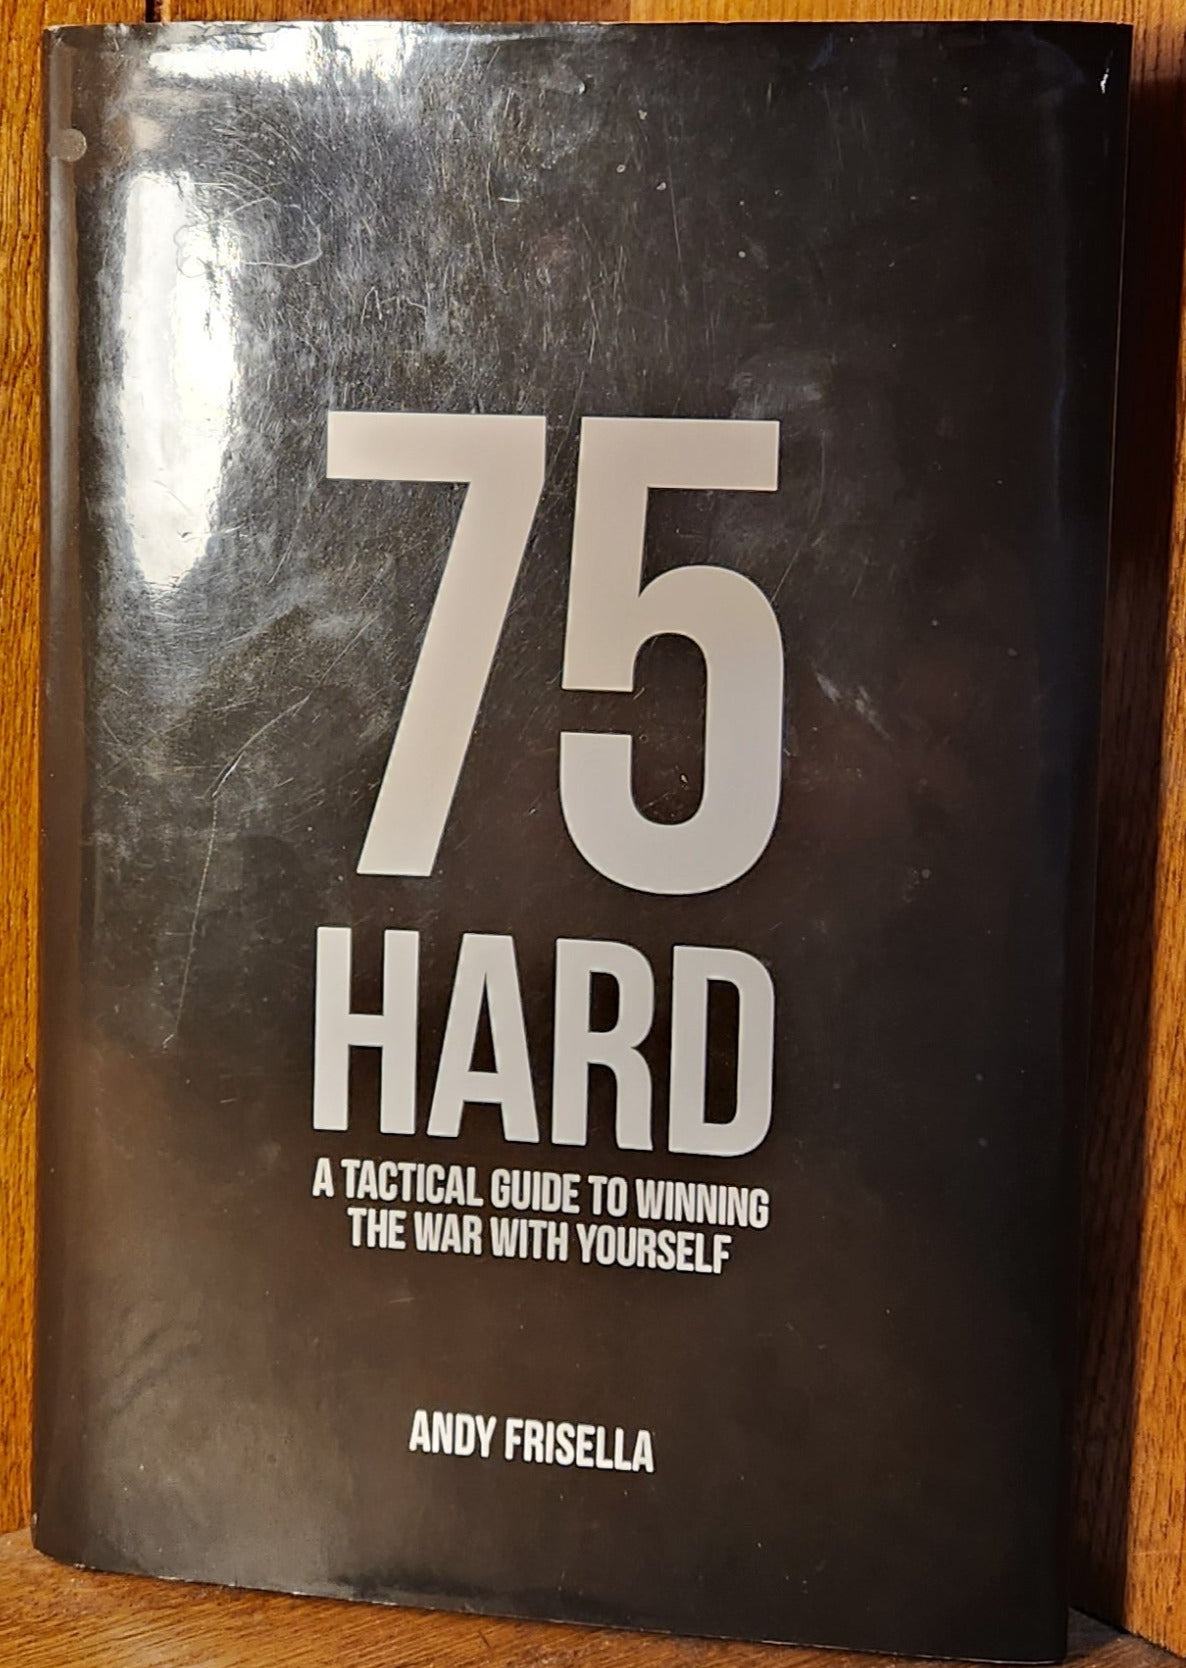 "75 Hard: A Tactical Guide to Winning the War with Yourself" by Andy Frisella - Dead Tree Dreams Bookstore